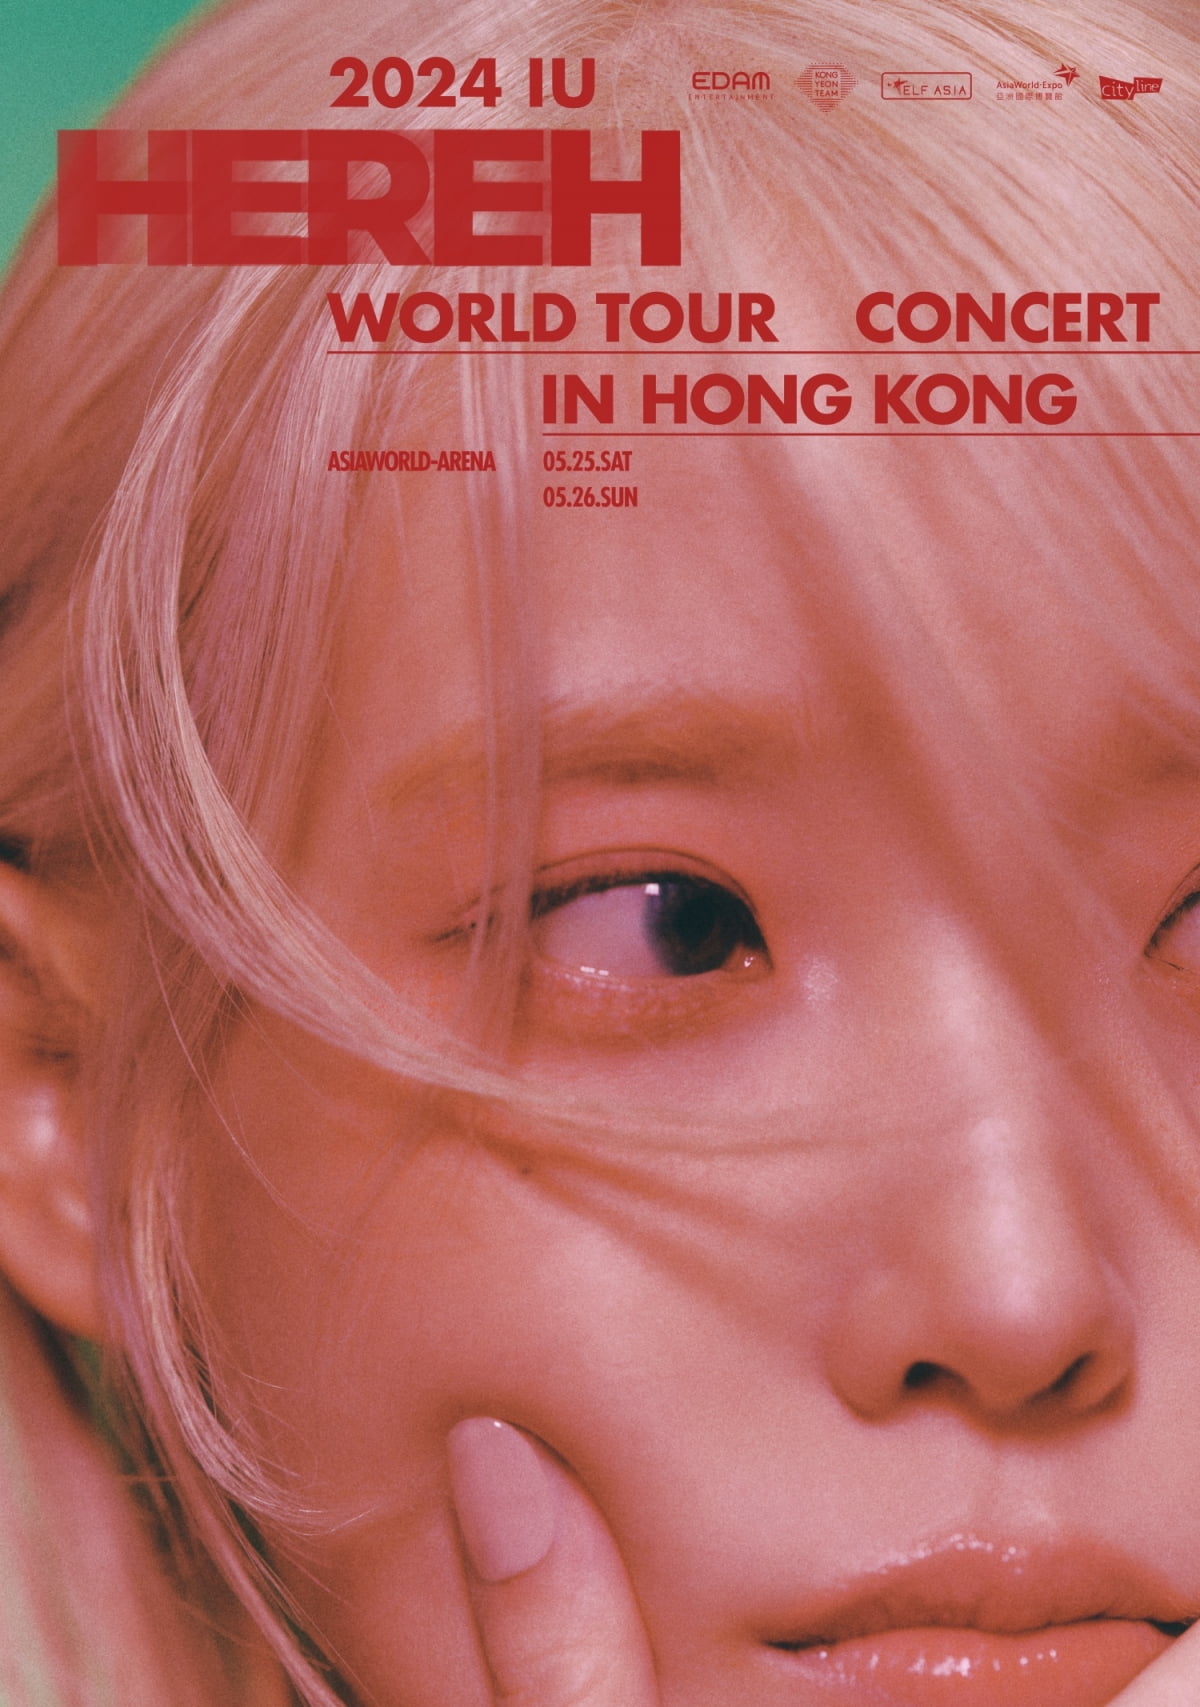 IU Hong Kong concert, all tickets sold out